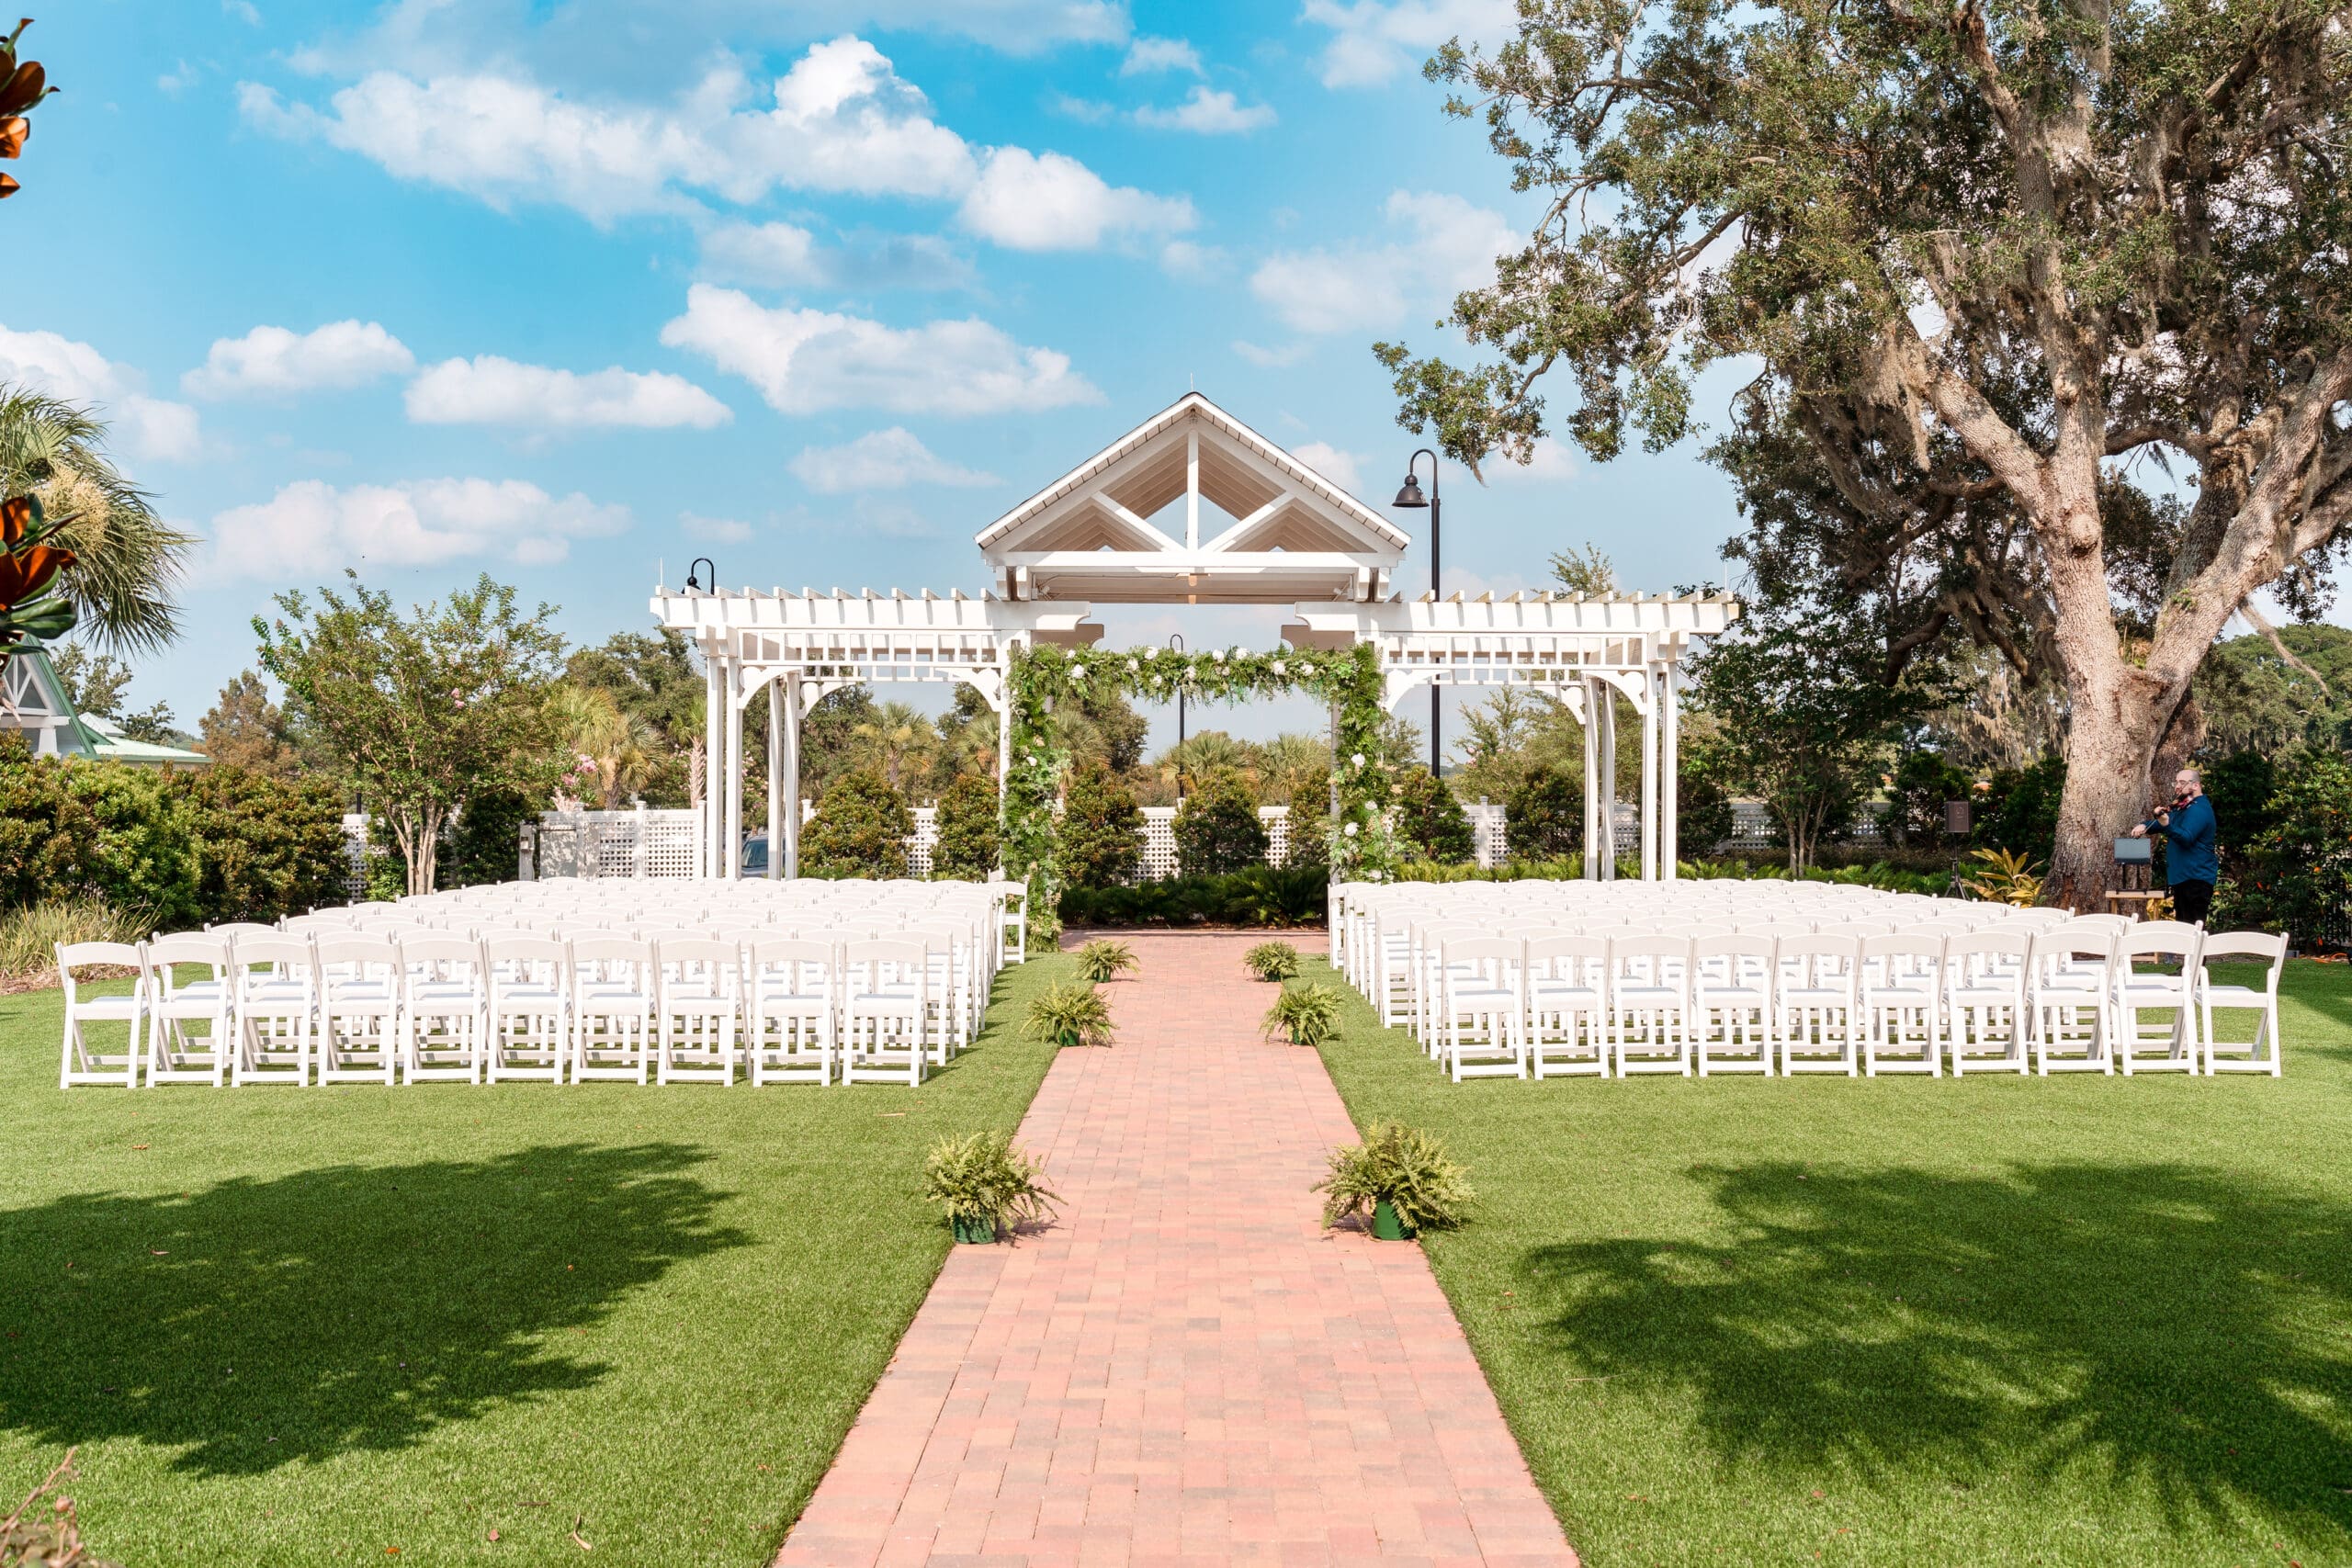 Pre-wedding shot of the outdoor altar at Ocoee Lakeshore Center adorned with greenery and white flowers.